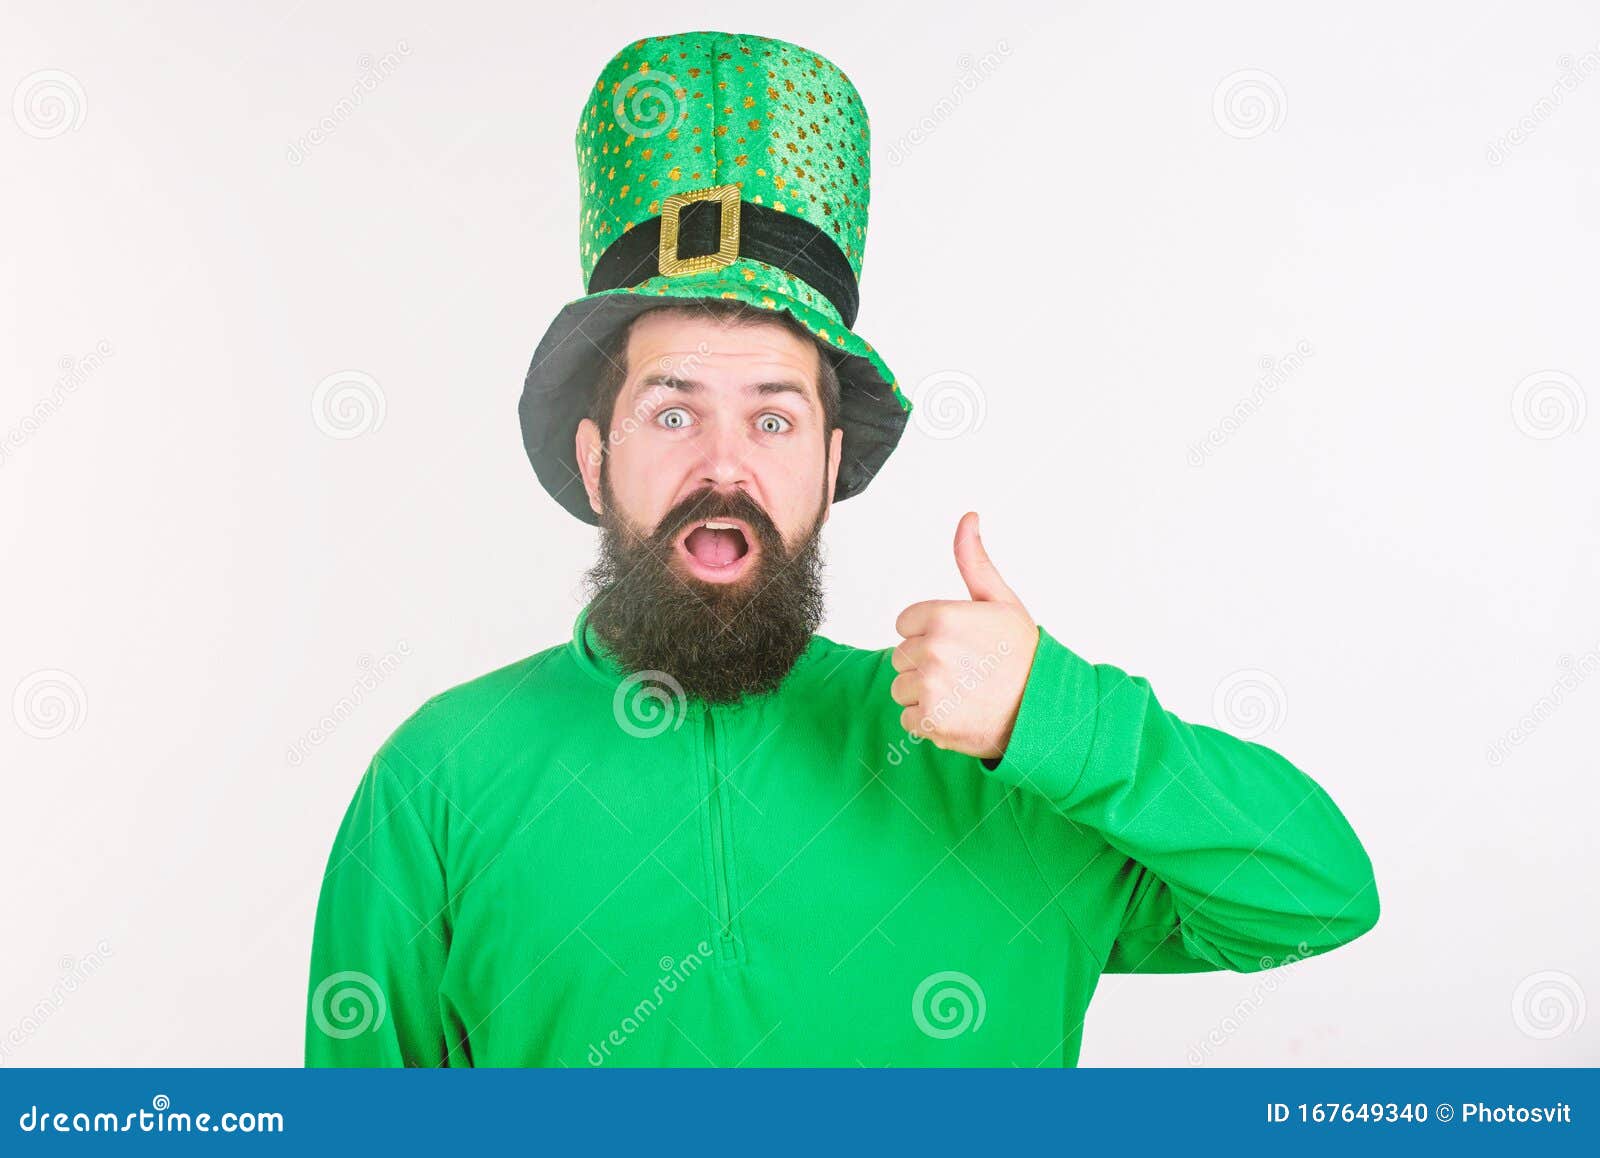 Happy saint patricks day. Hipster in leprechaun hat and costume keeping mouth open. Bearded man celebrating saint patricks day. Irish man with beard wearing green. Thumbs up for saint patrick.